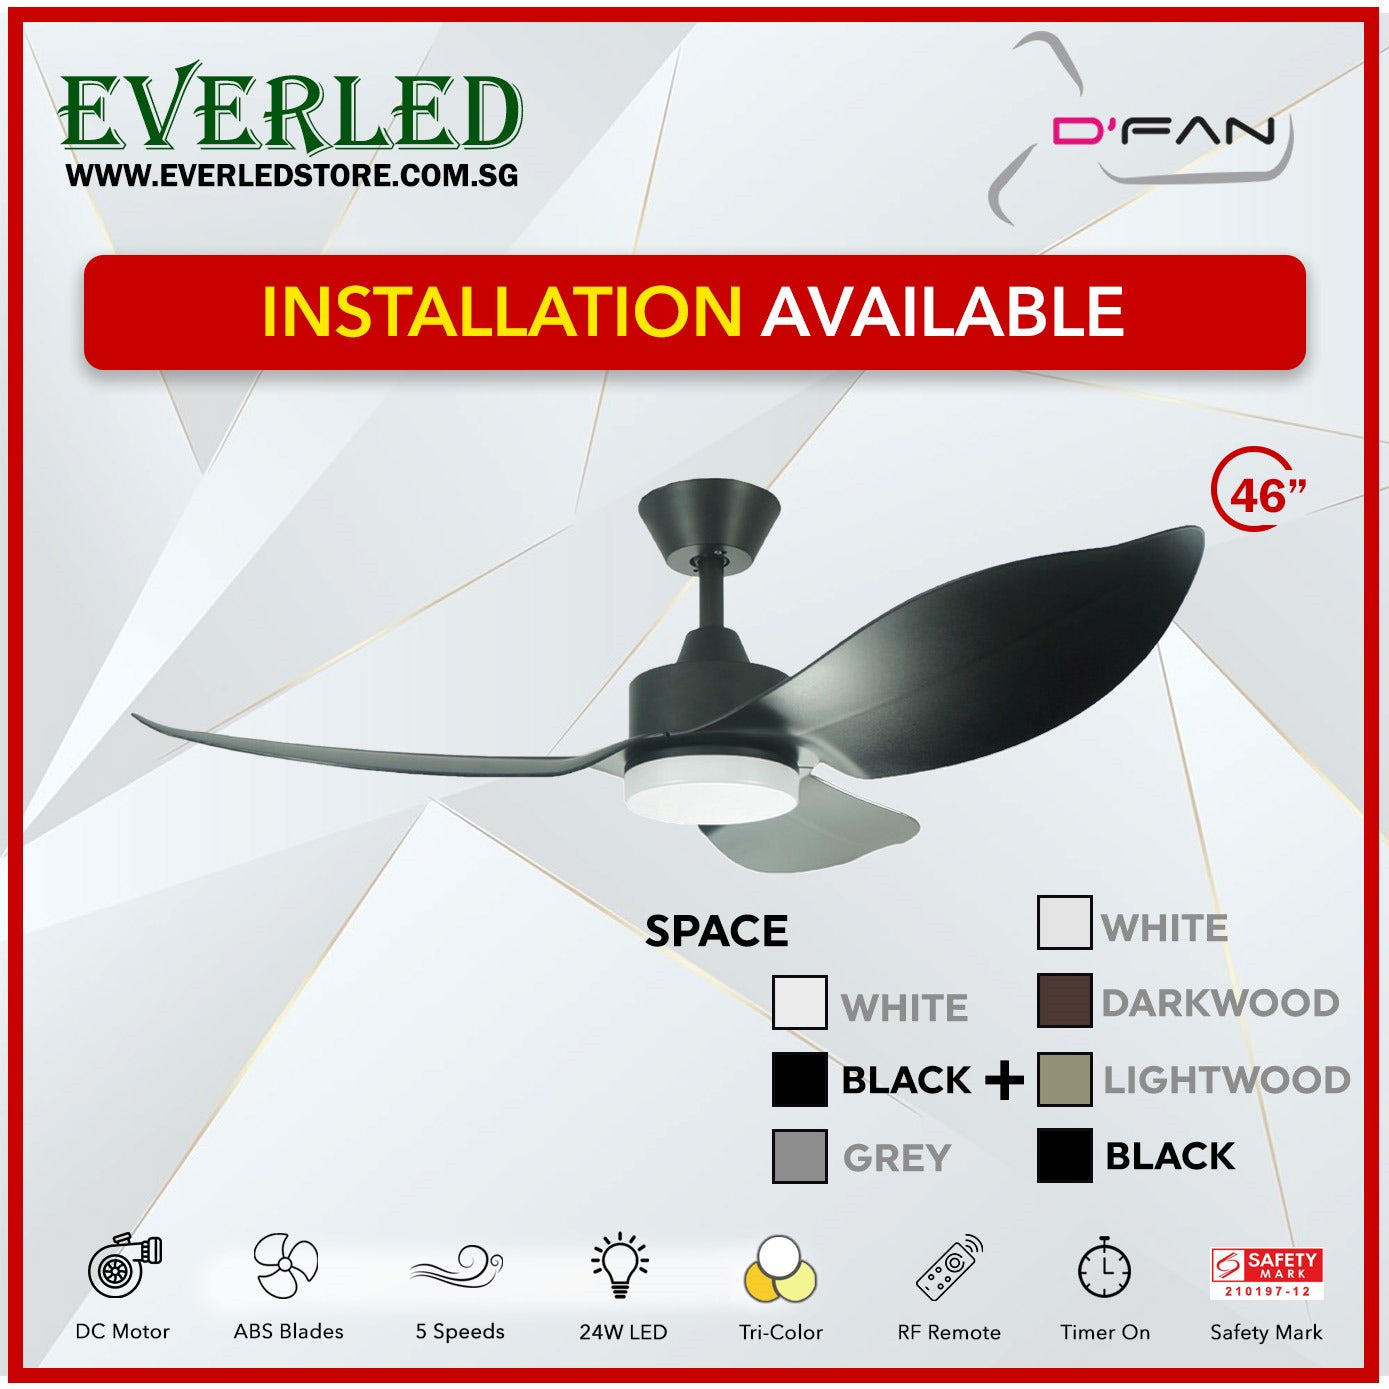 *FREE INSTALLATION* Mistral Dfan DC Space 46"  with Tri-color LED (Inverter DC Fan)